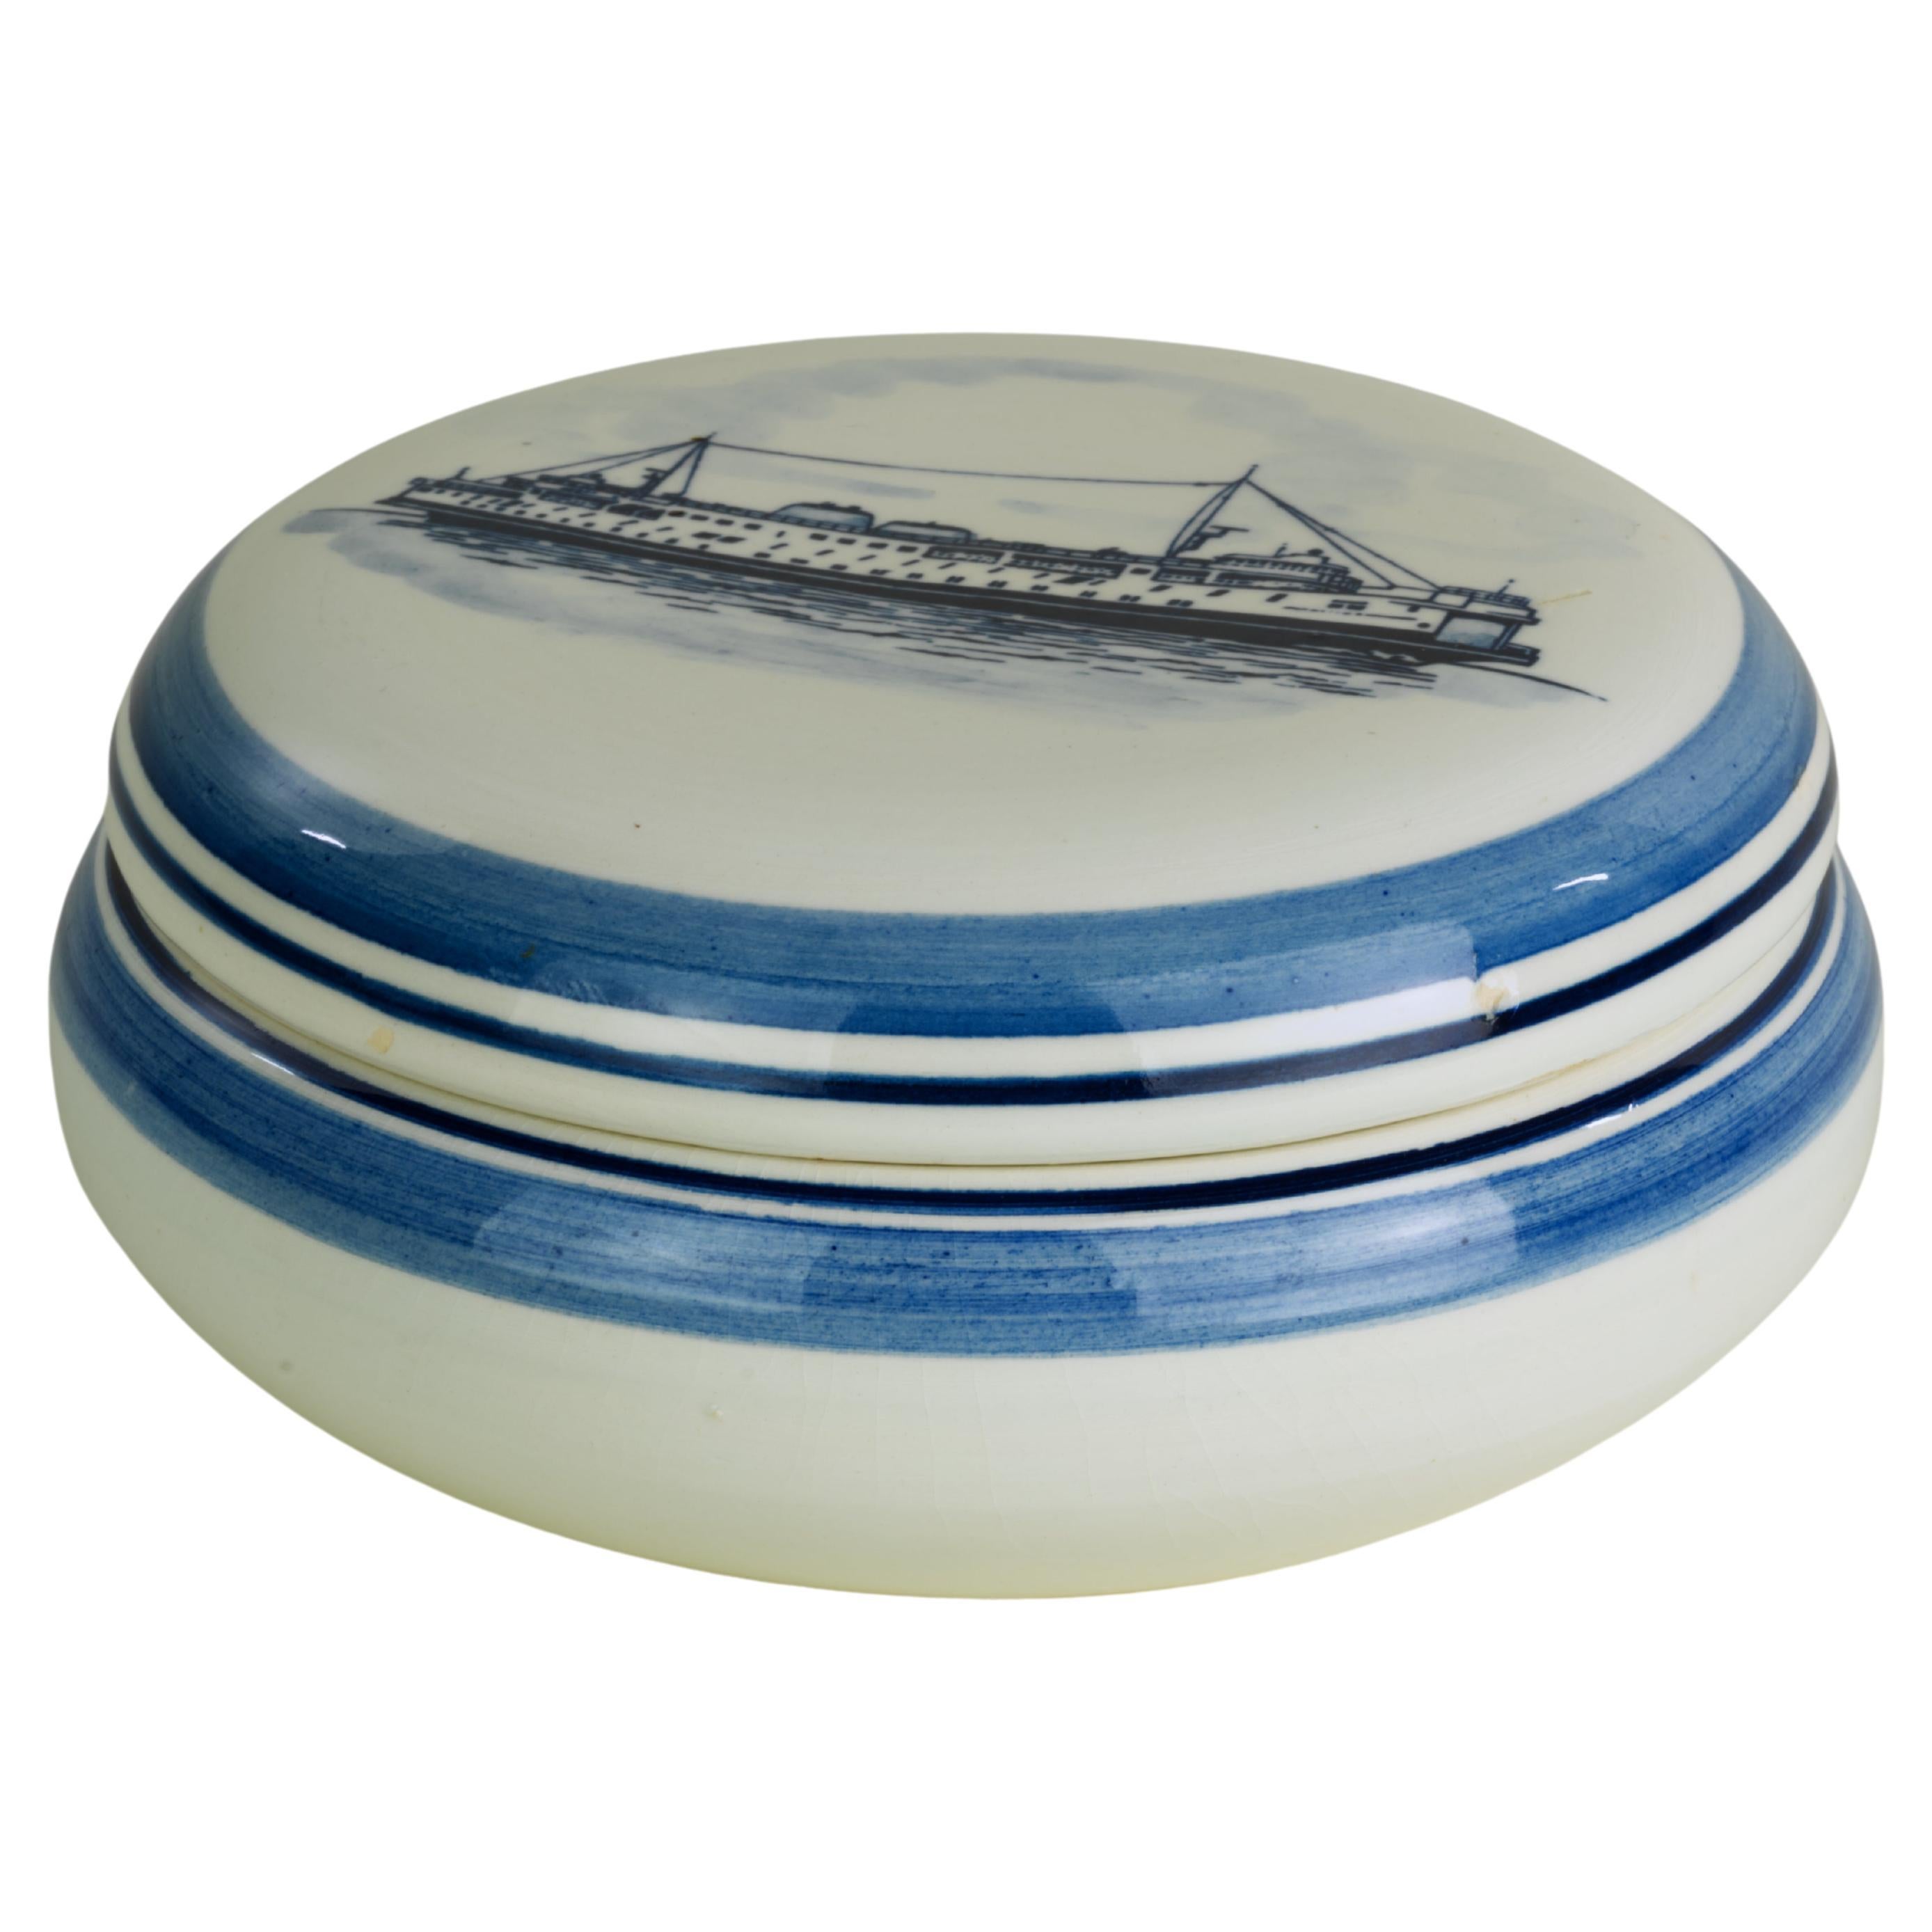 
Vintage promotional advertising jar with lid is made of glazed ceramics and is decorated with two-tone blue drawing of a ship on a sea. It is marked in blue script on the inner side if the lid. The marks include company logo, company name, Jan